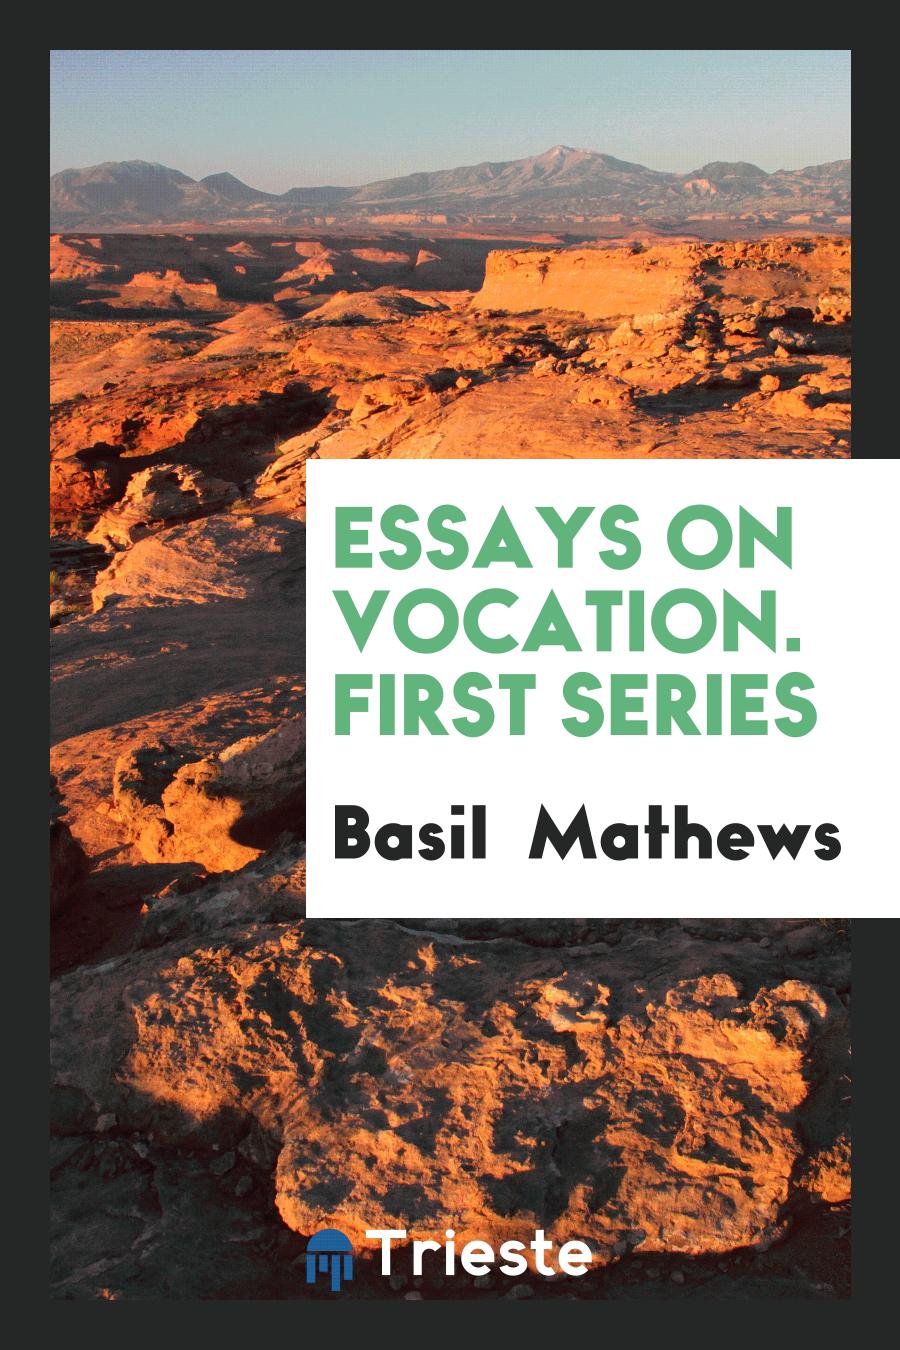 Essays on Vocation. First Series